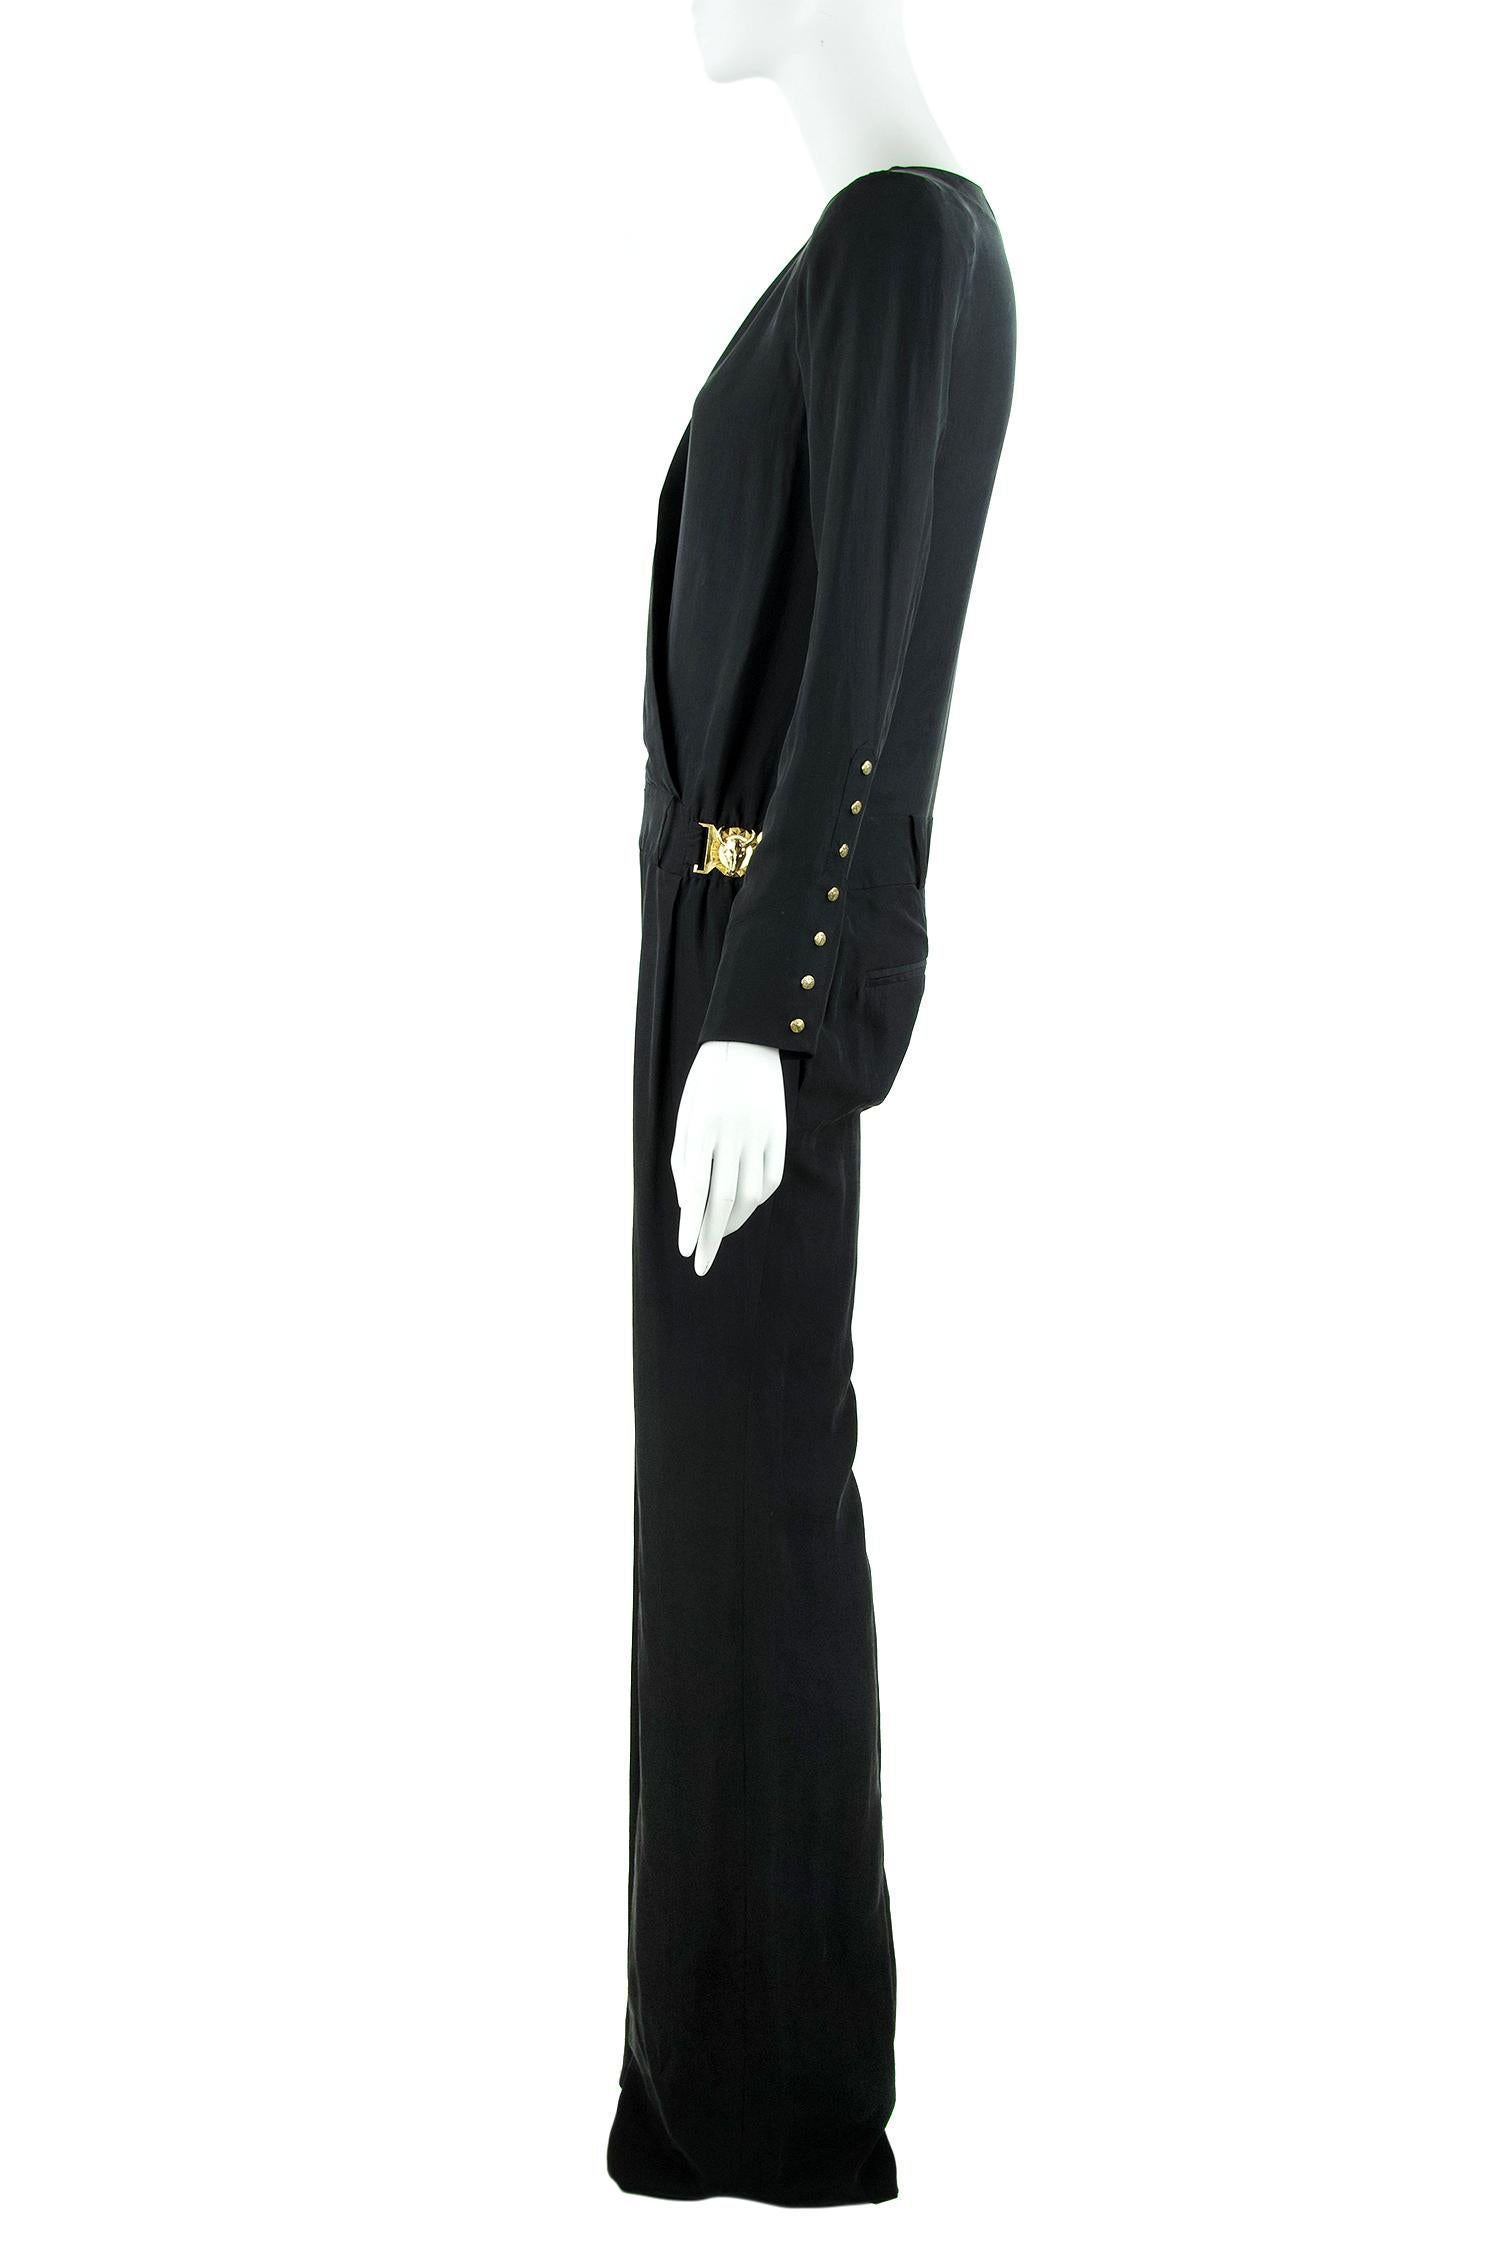 Gorgeous and elegant 100% silk Balmain jumpsuit.  Can be worn year around and will certainly be your next wardrobe staple.  Features a v neck and gold medallions on each hip with chic gold buttons up the wrist to the elbow.

Size: FR 34

Condition: